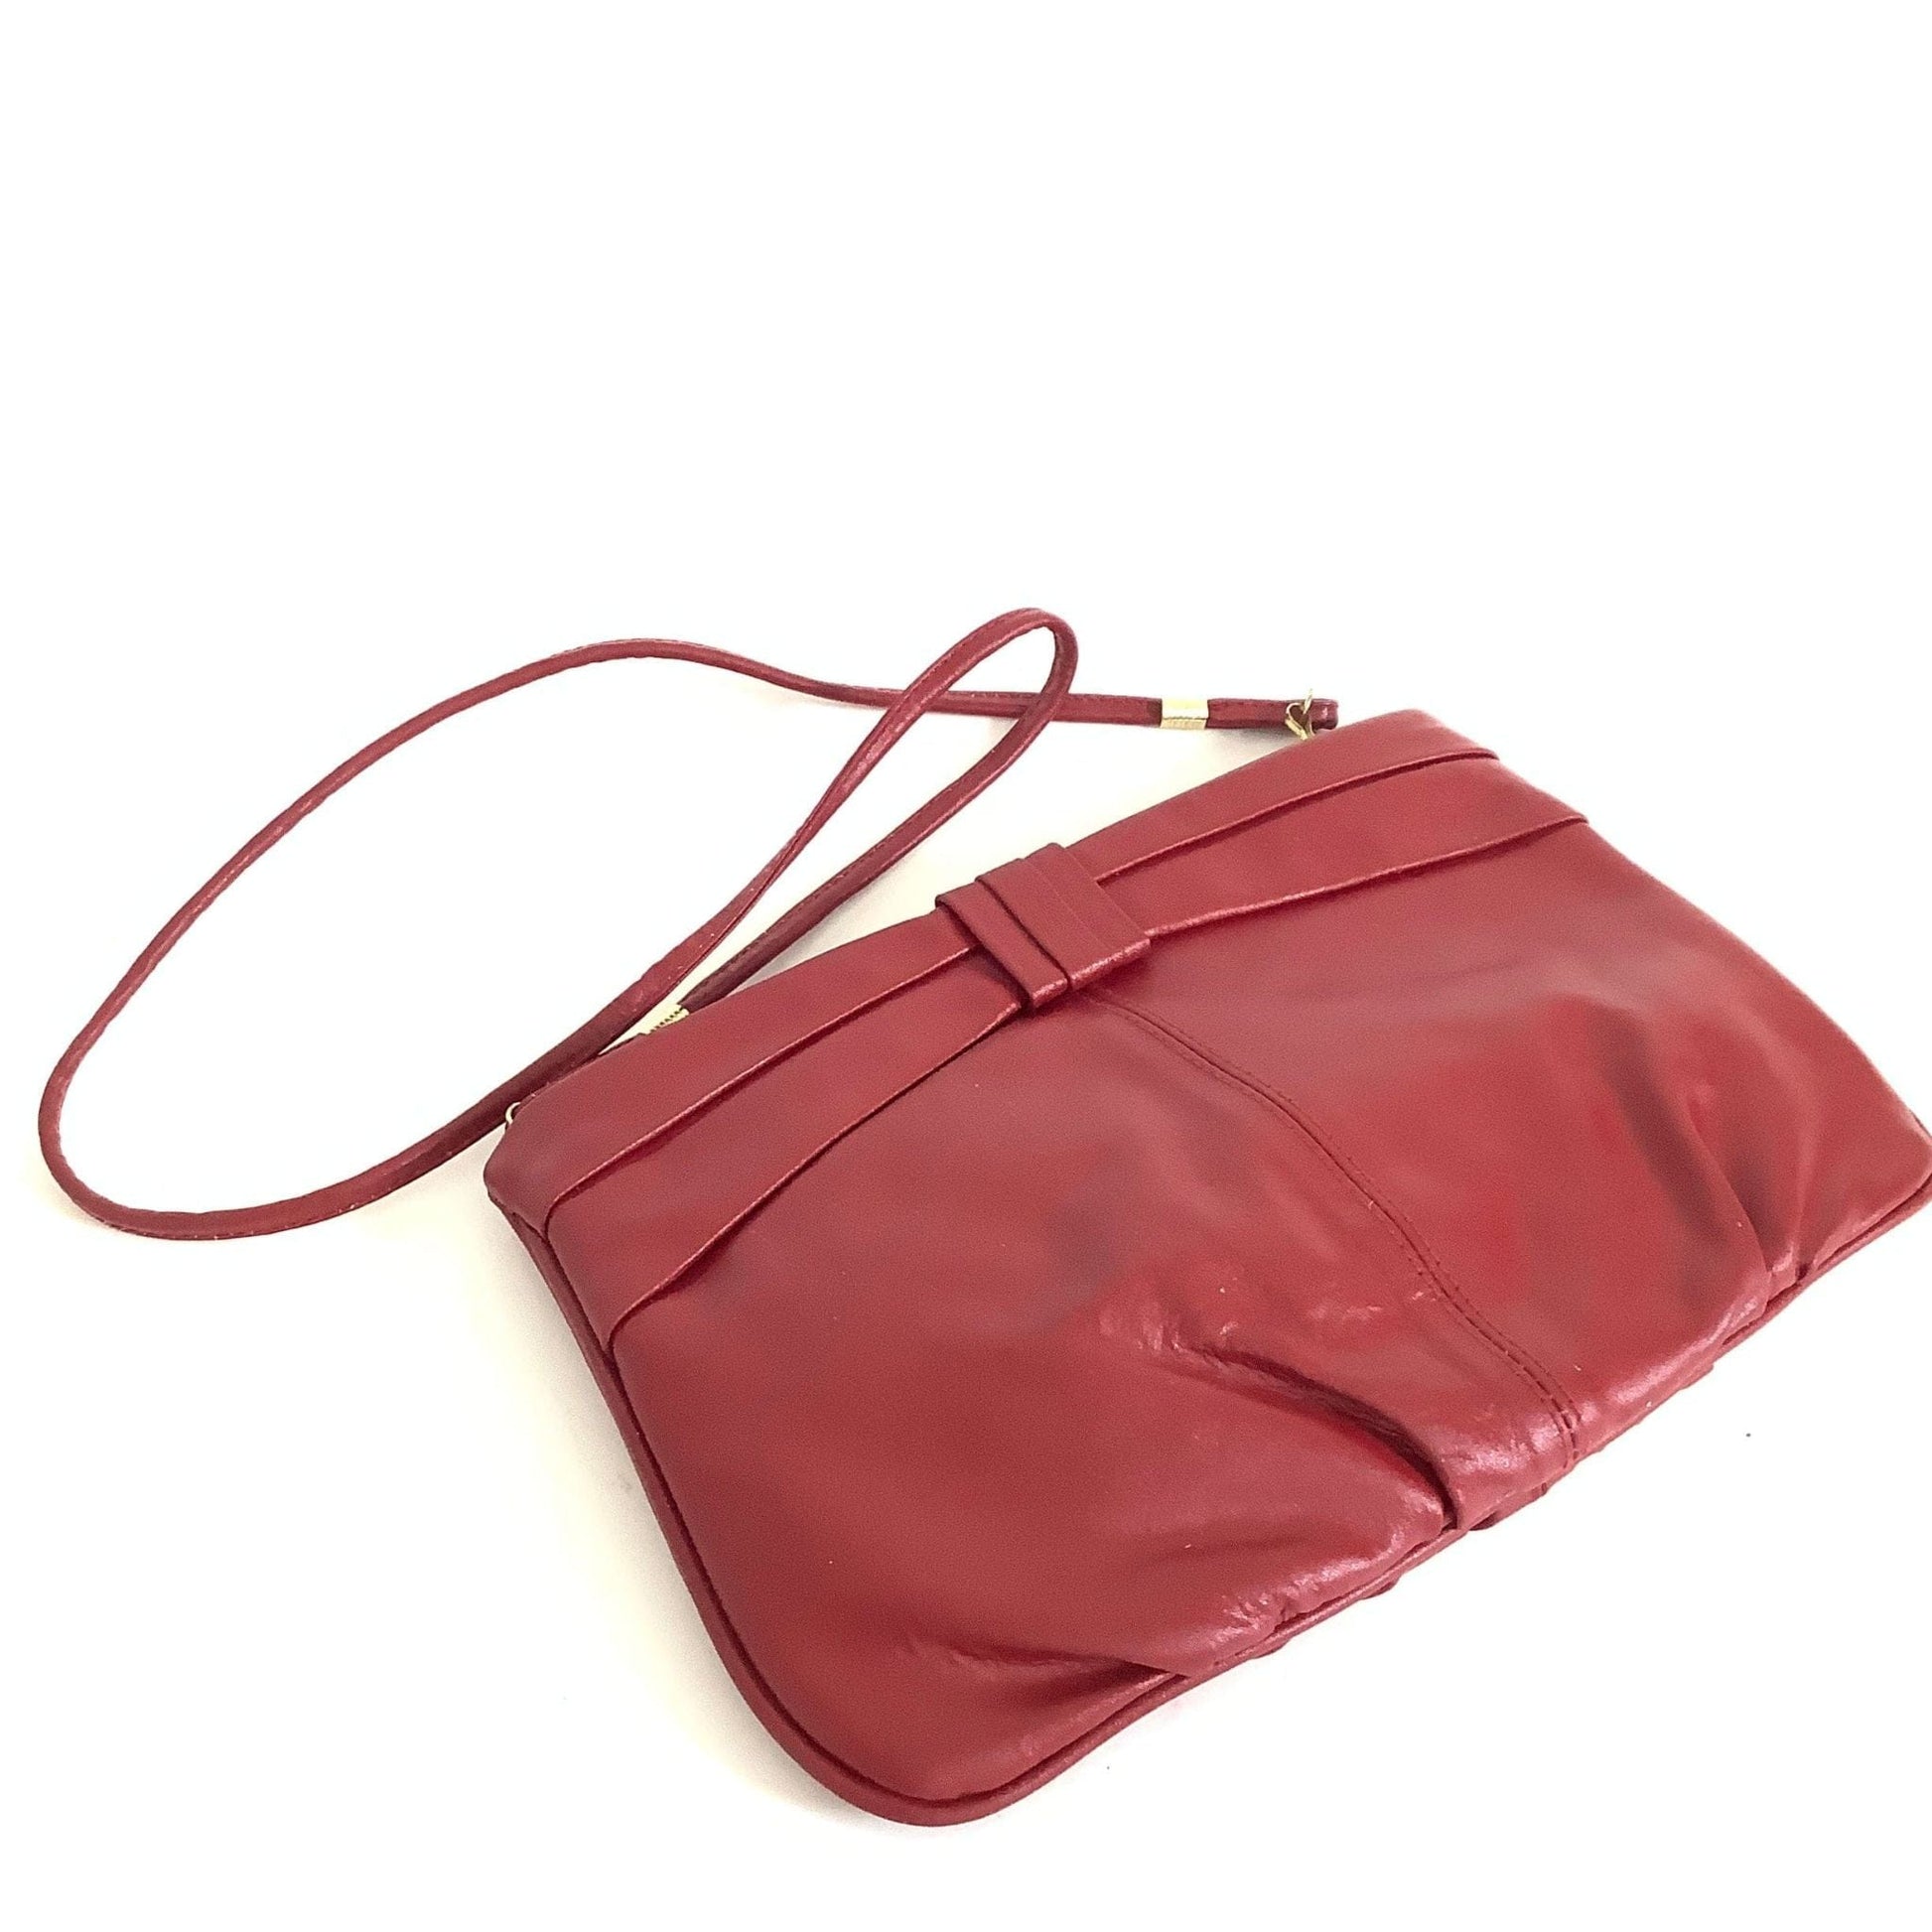 1980s Red Leather Bag Red / Leather / Vintage 1980s